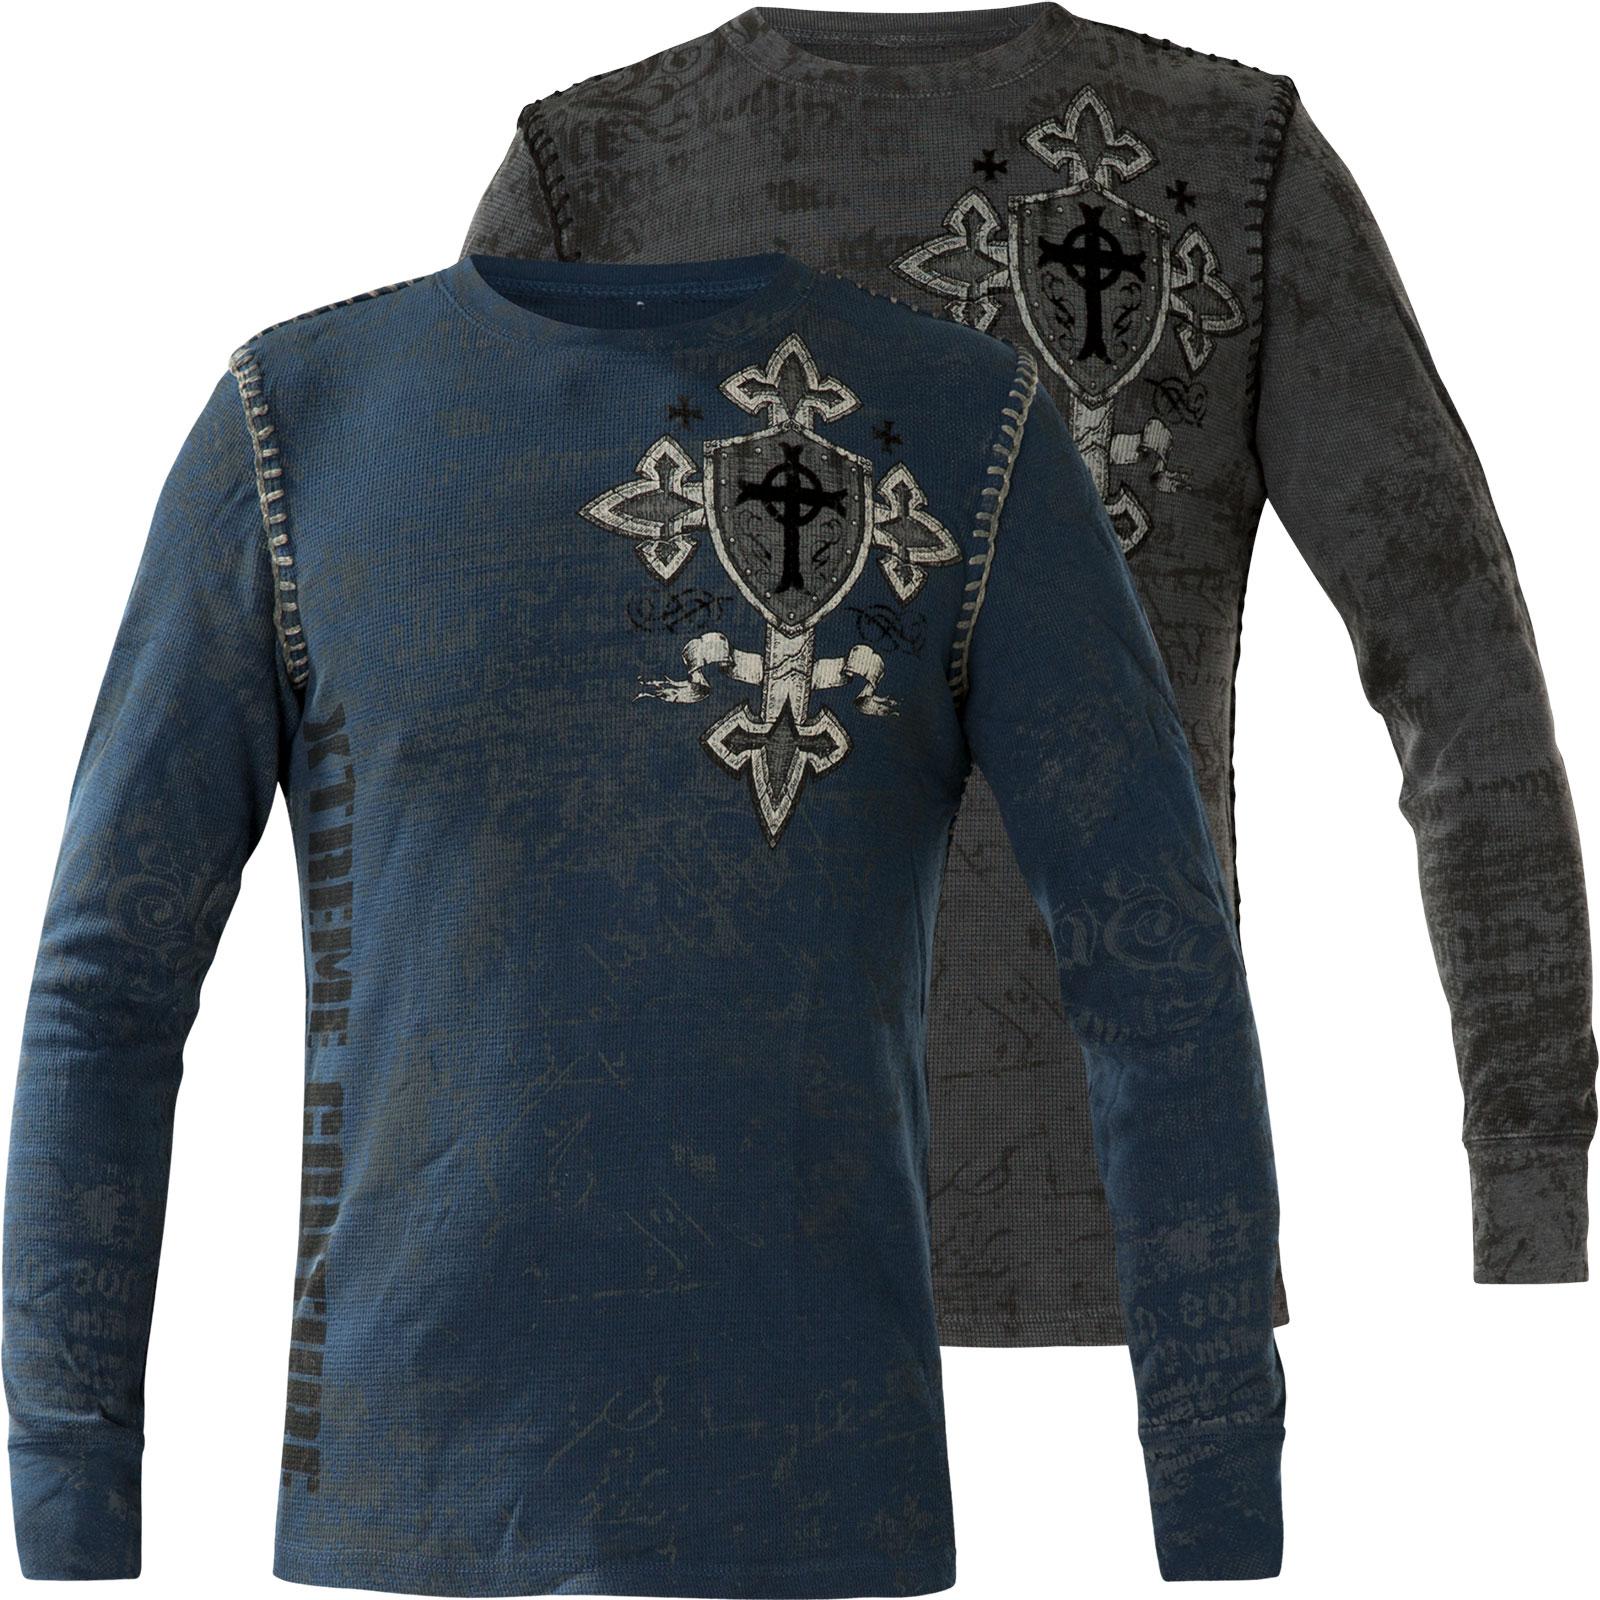 xtreme-couture-by-affliction-thermal-pro-faith-print-with-large-cross